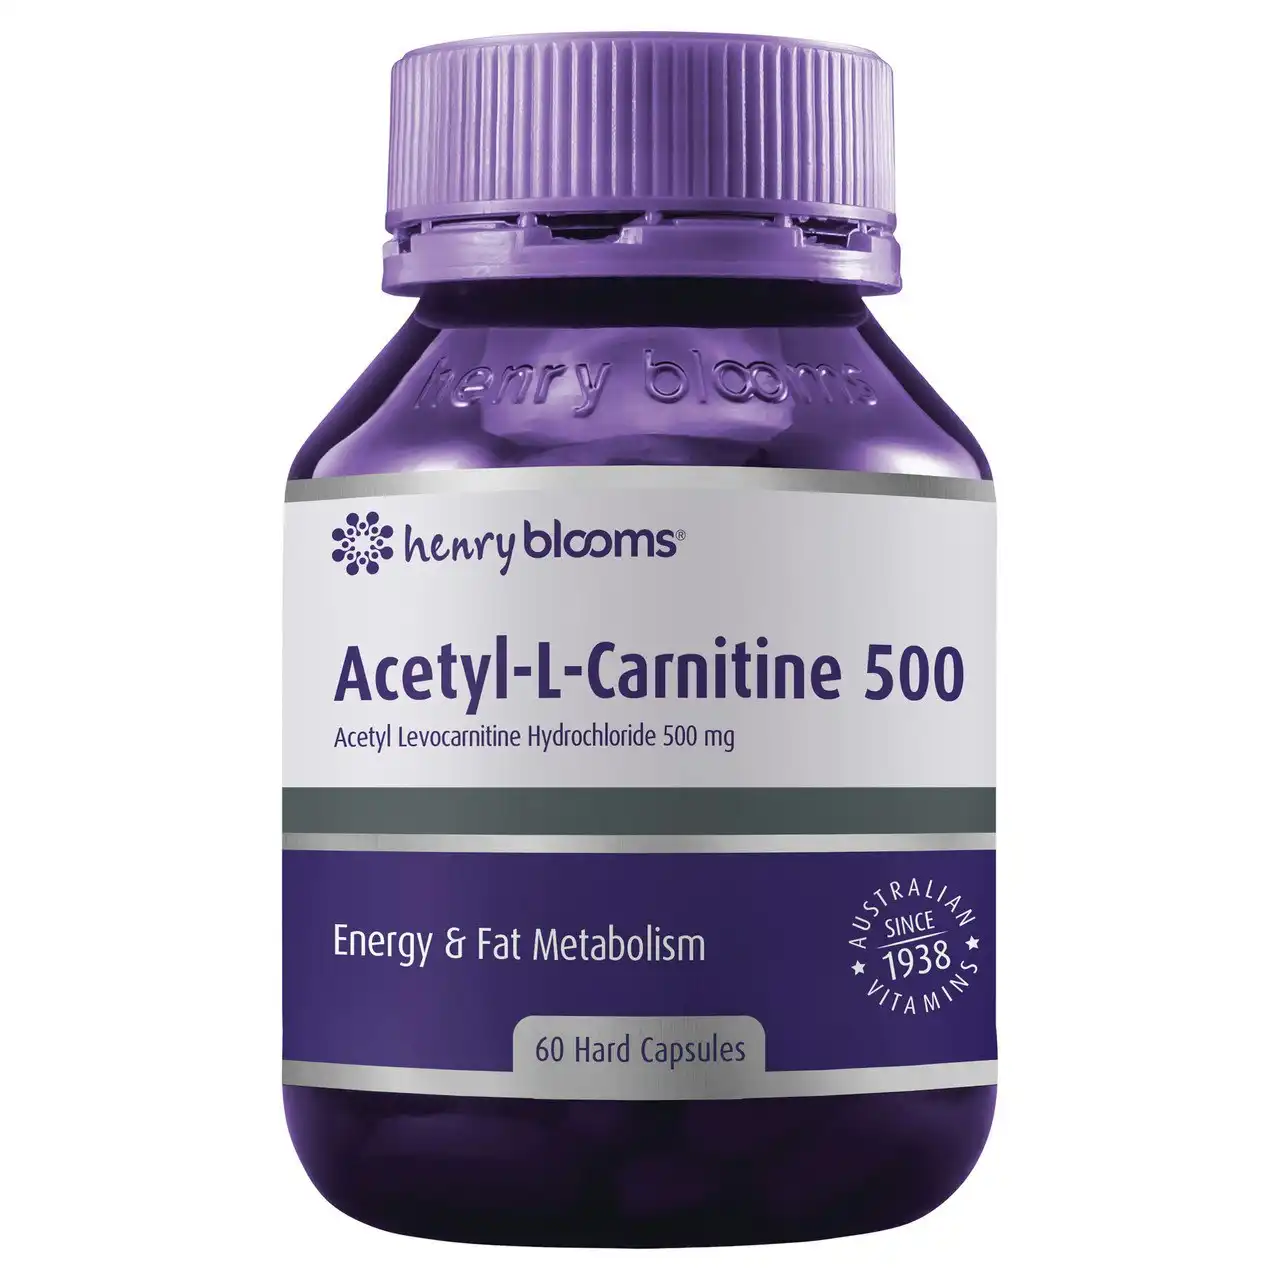 Henry Blooms Acetyl-L-Carnitine 500 60 capsules